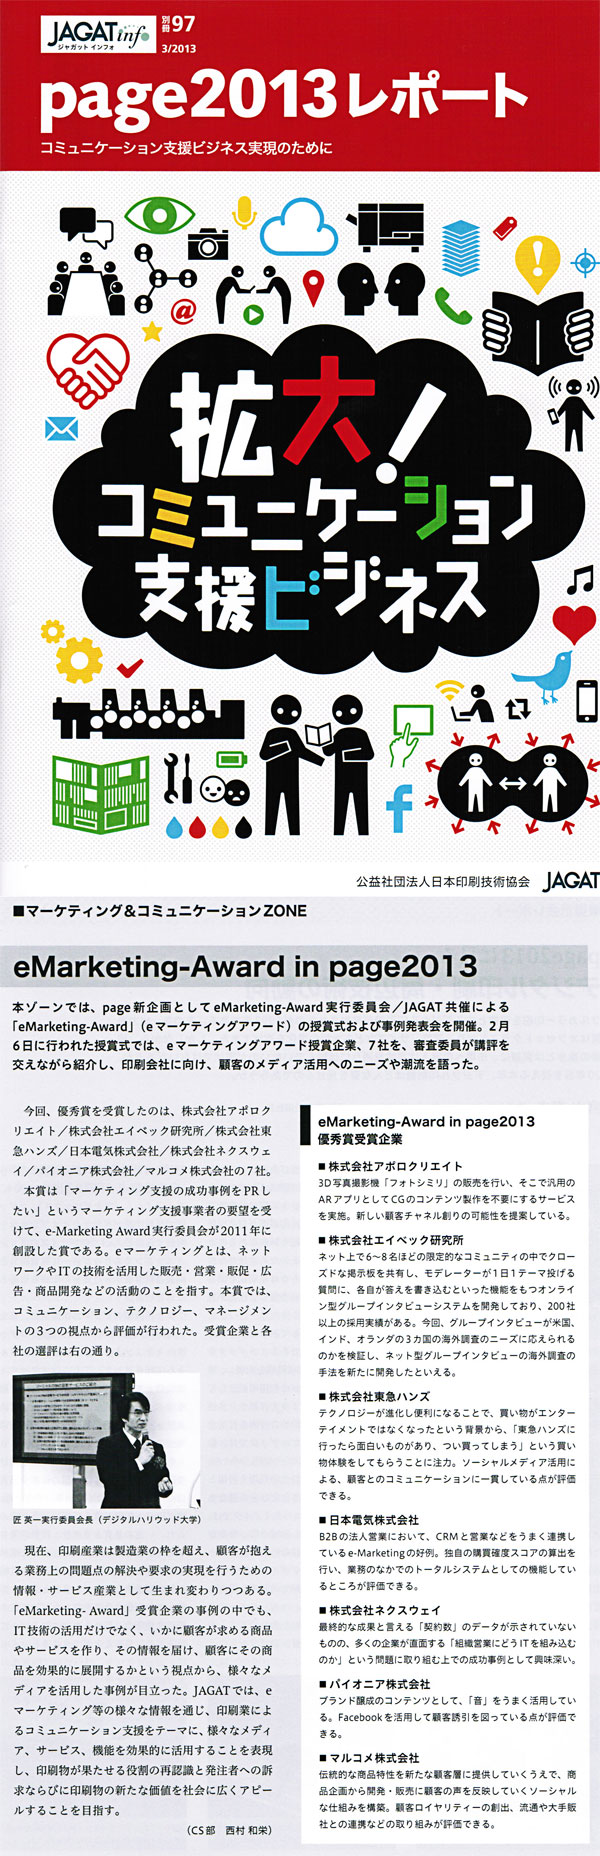 eMarketing-Award in page2013